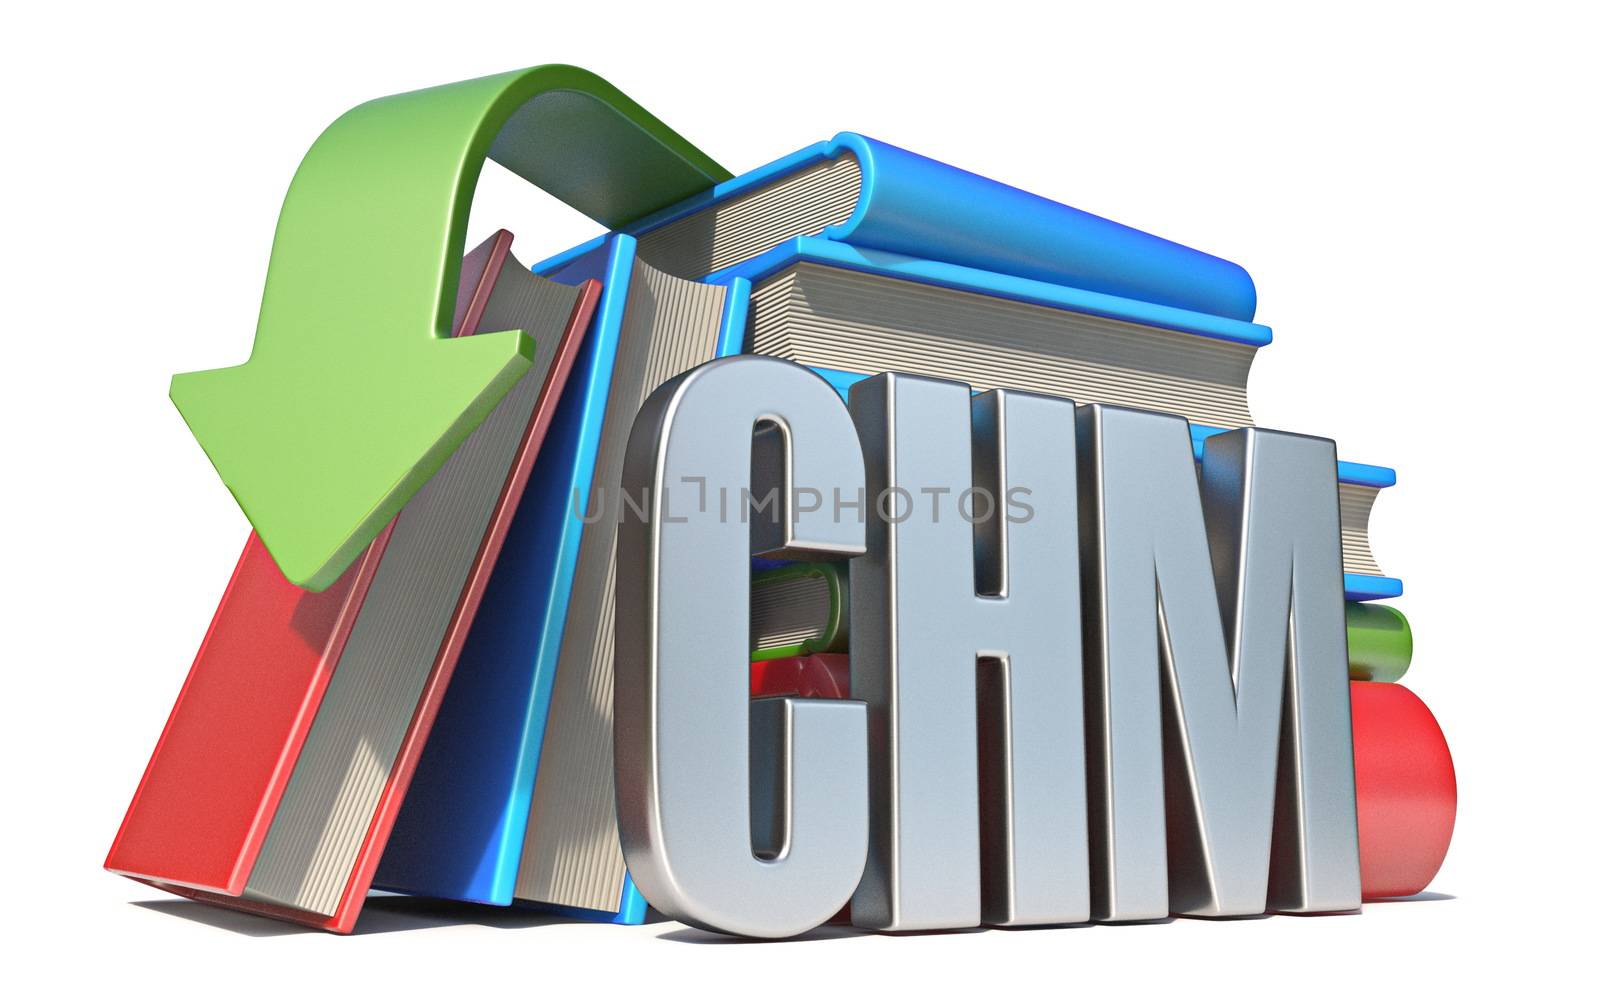 eBook CHM download concept 3D render illustration isolated on white background